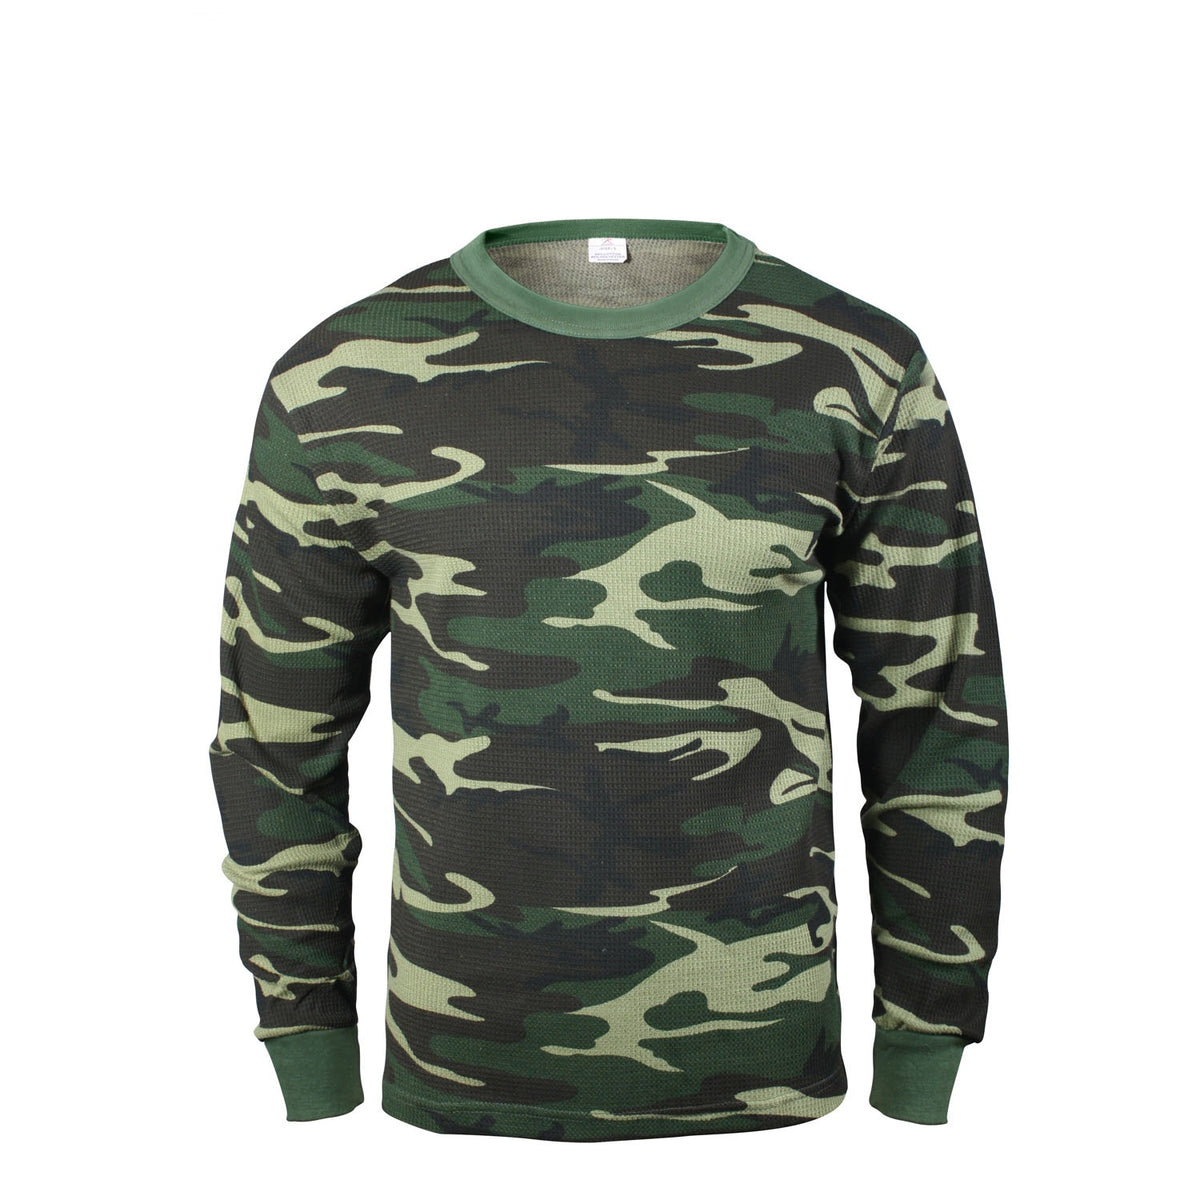 Rothco Thermal Knit Underwear Top Woodland Camo